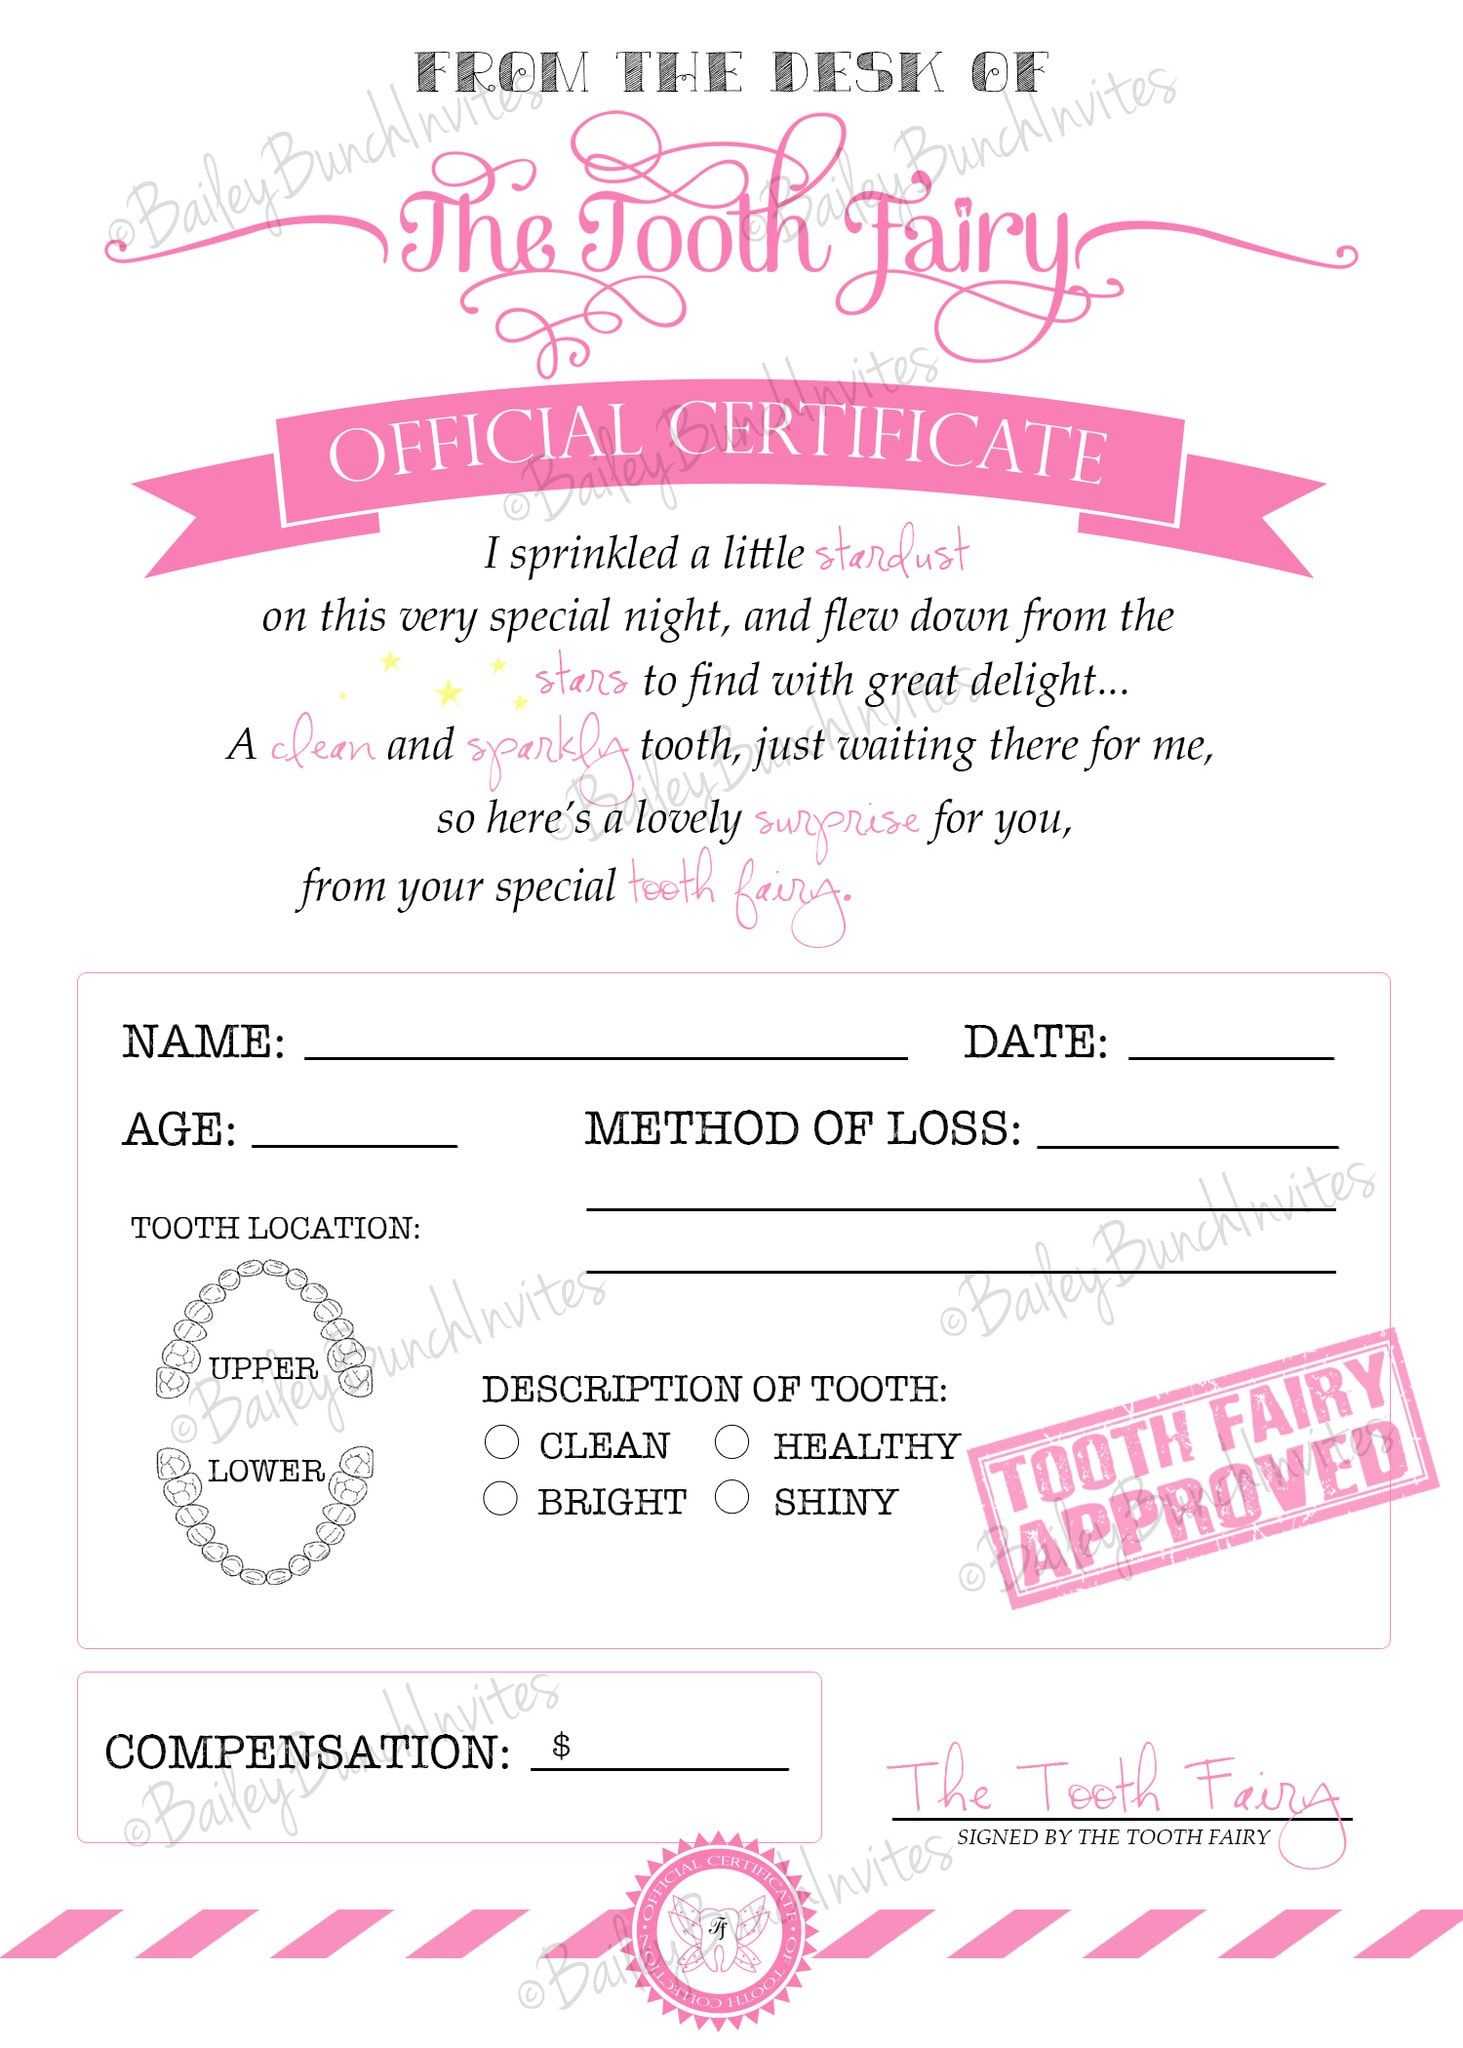 Tooth Fairy Certificate - Pink - Instant Download Intended For Tooth Fairy Certificate Template Free